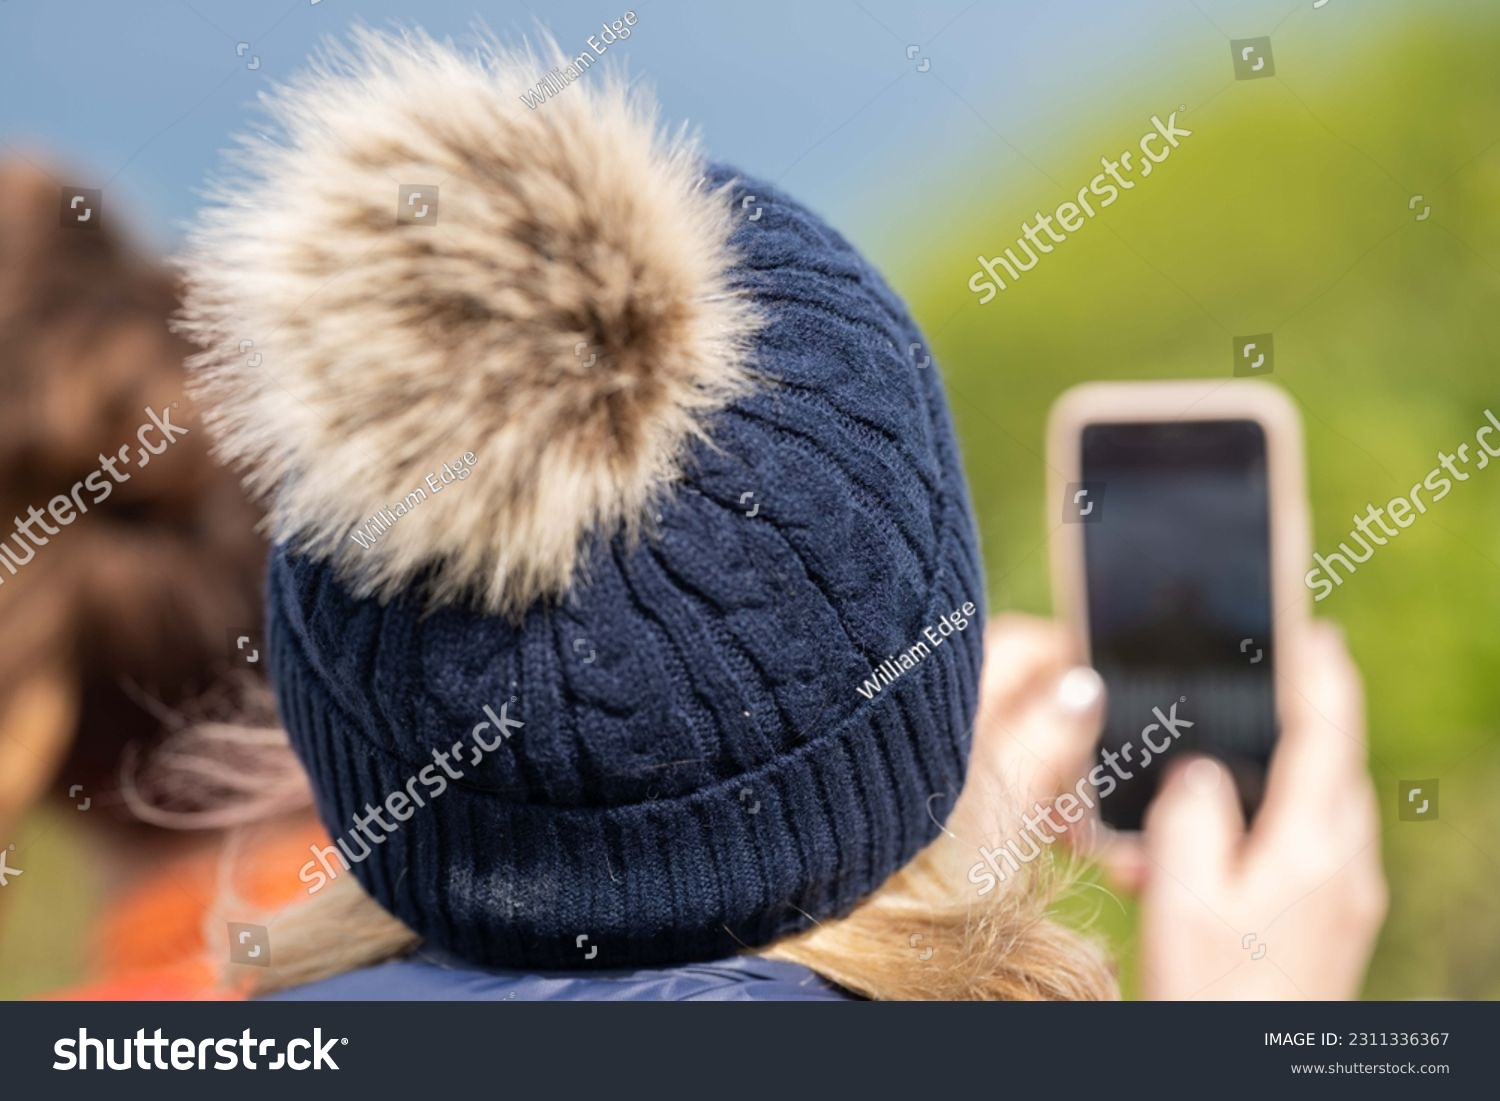 Old lady taking a photo on her phone, wearing a beanie. #2311336367